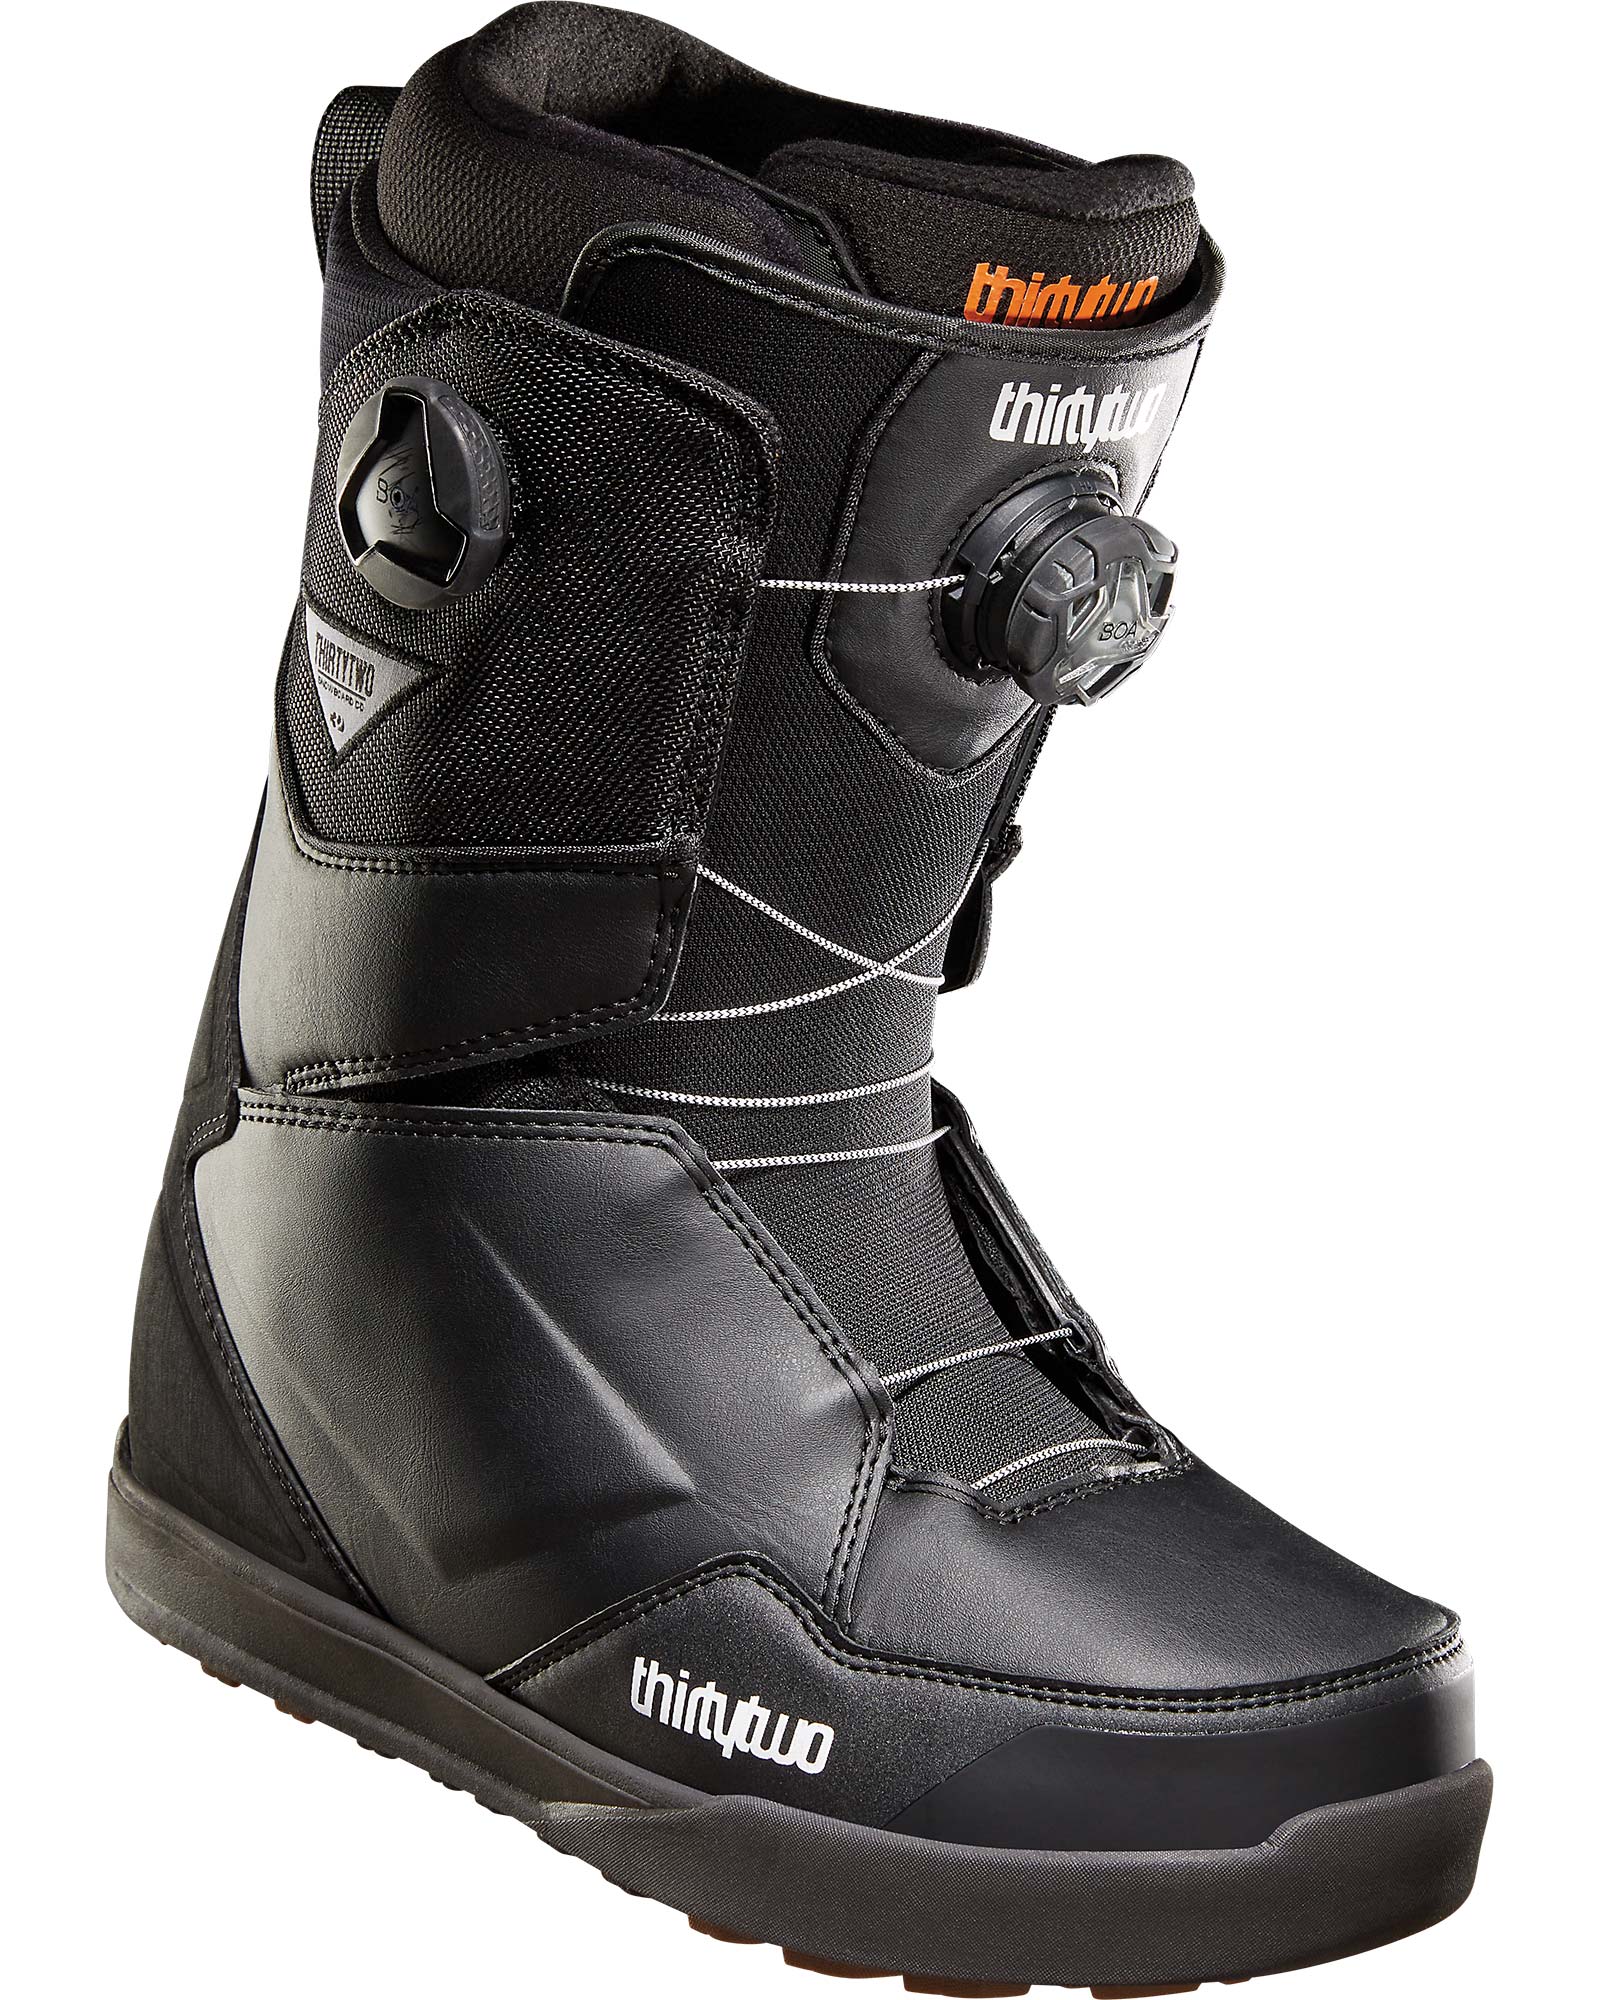 ThirtyTwo Men's Lashed Double BOA Snowboard Boots 0